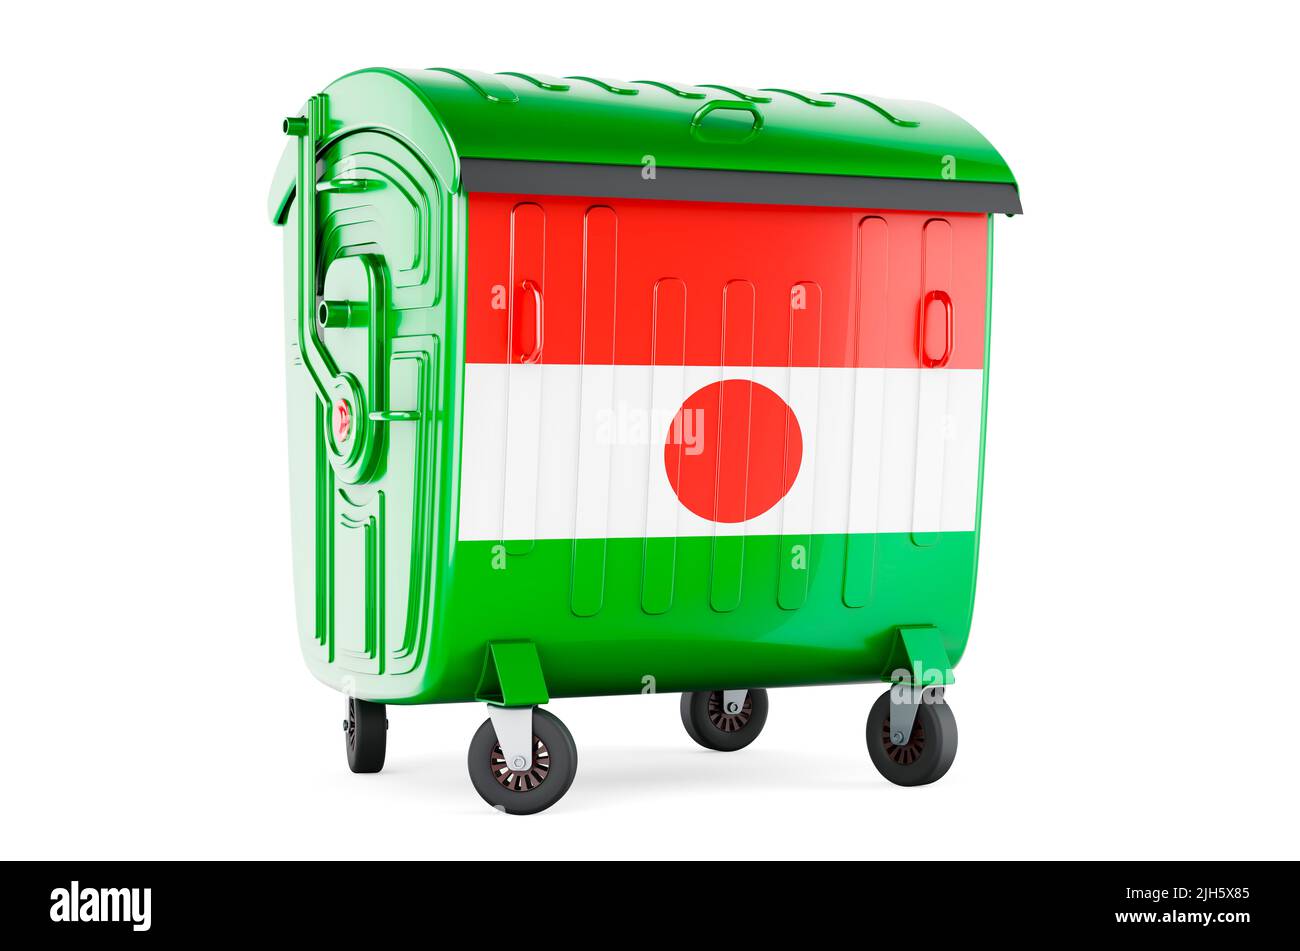 Garbage container with Niger flag, 3D rendering isolated on white background Stock Photo